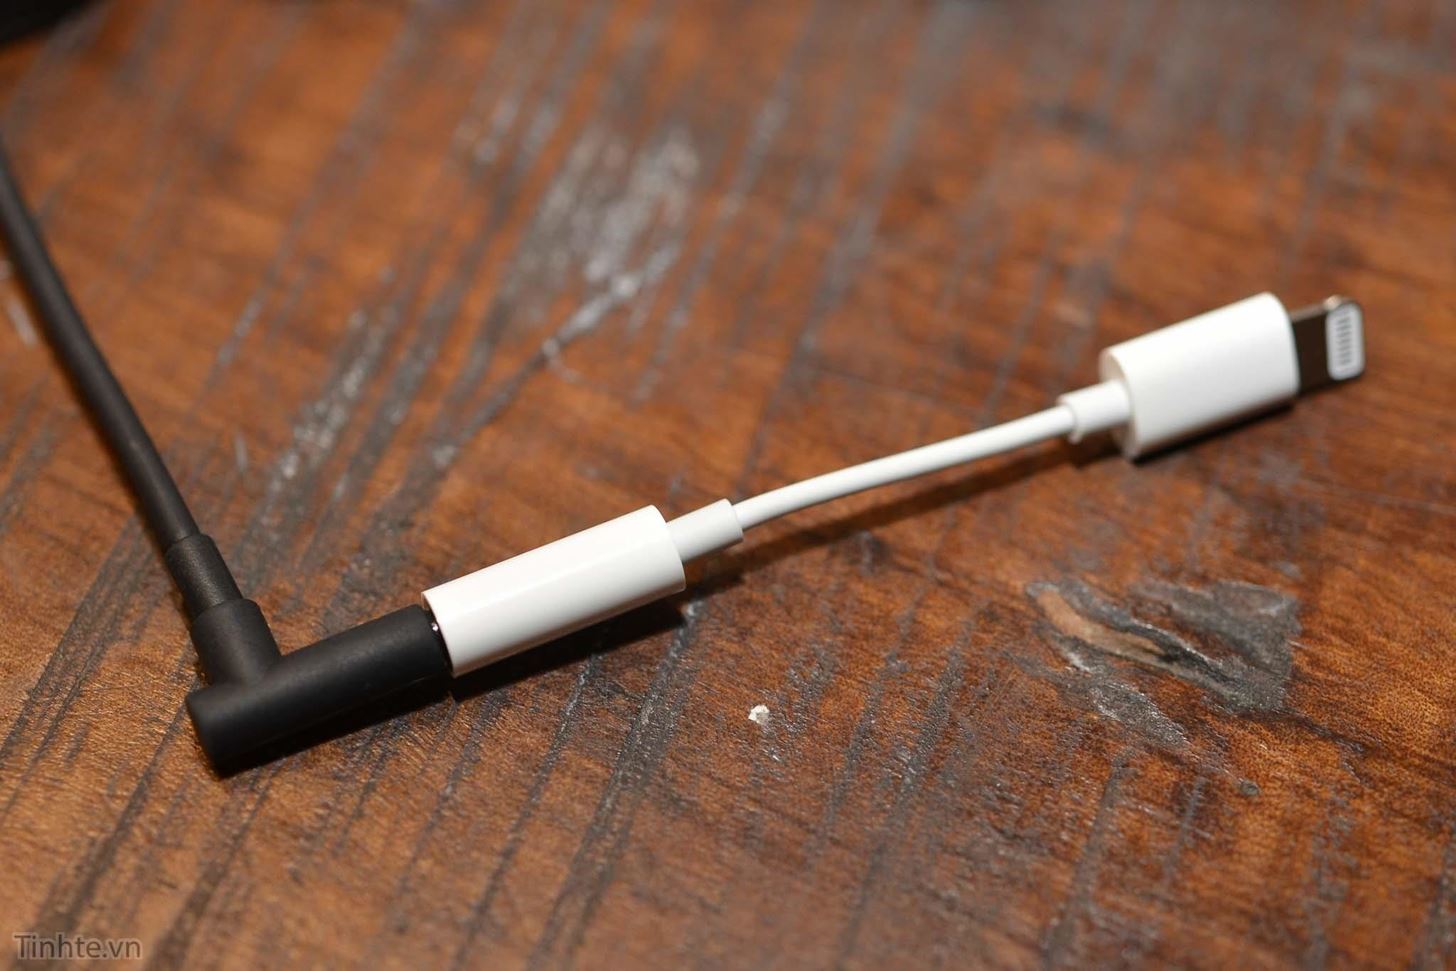 Finally, Real Proof That the iPhone 7 Will Come with a Headphones Lightning Adapter